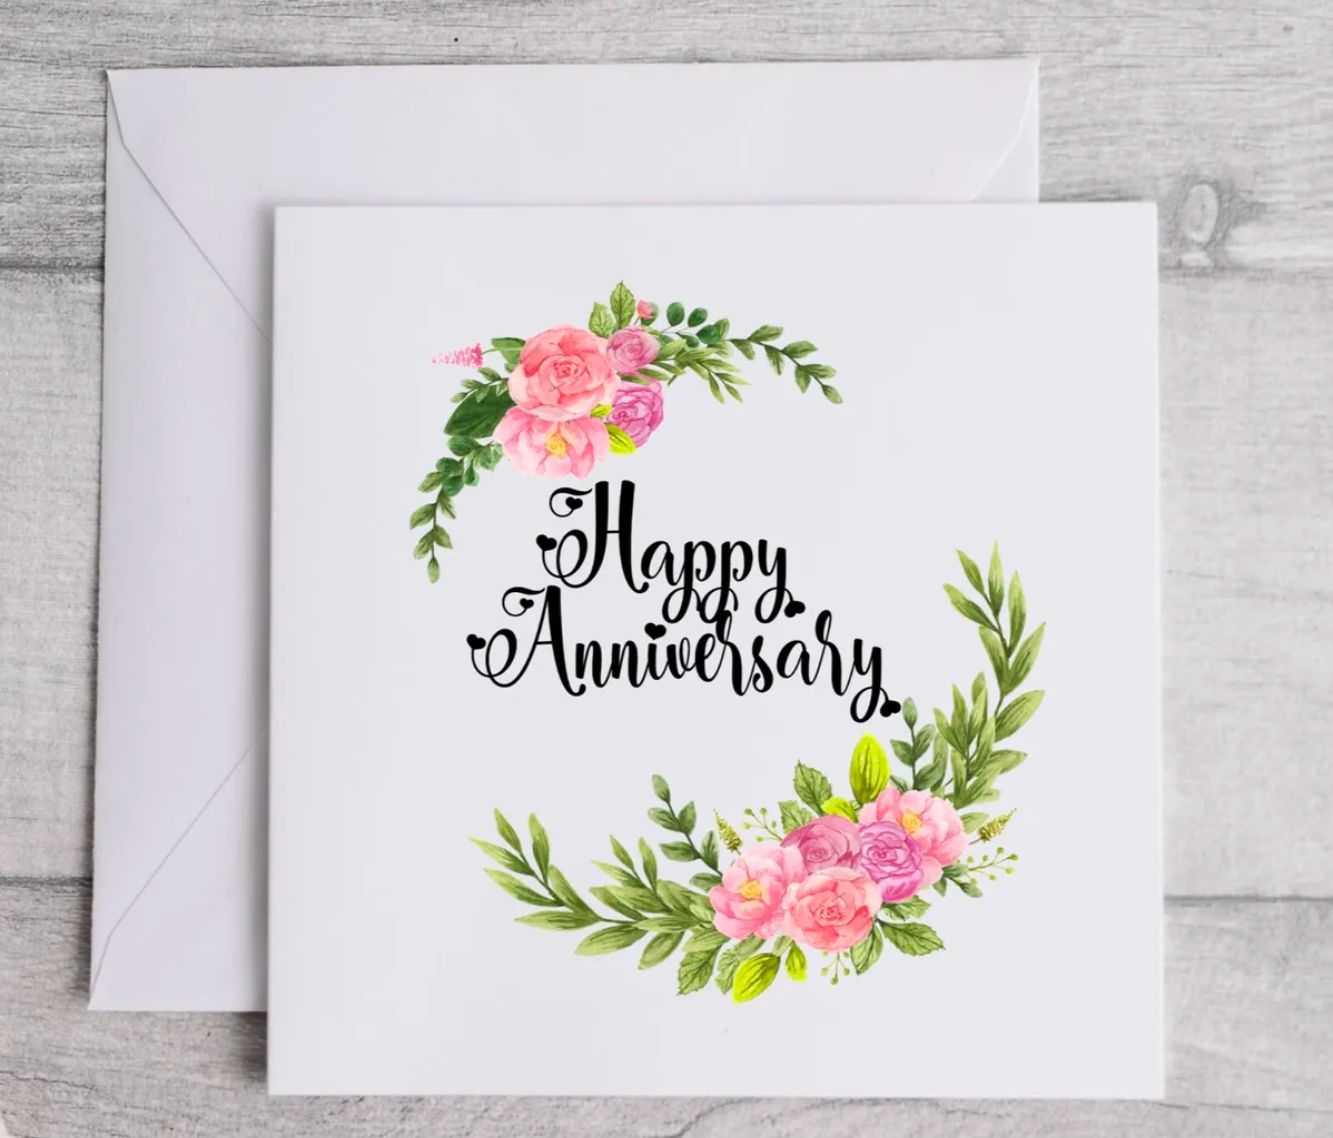 Expert Tips on Making Anniversary Cards Meaningful